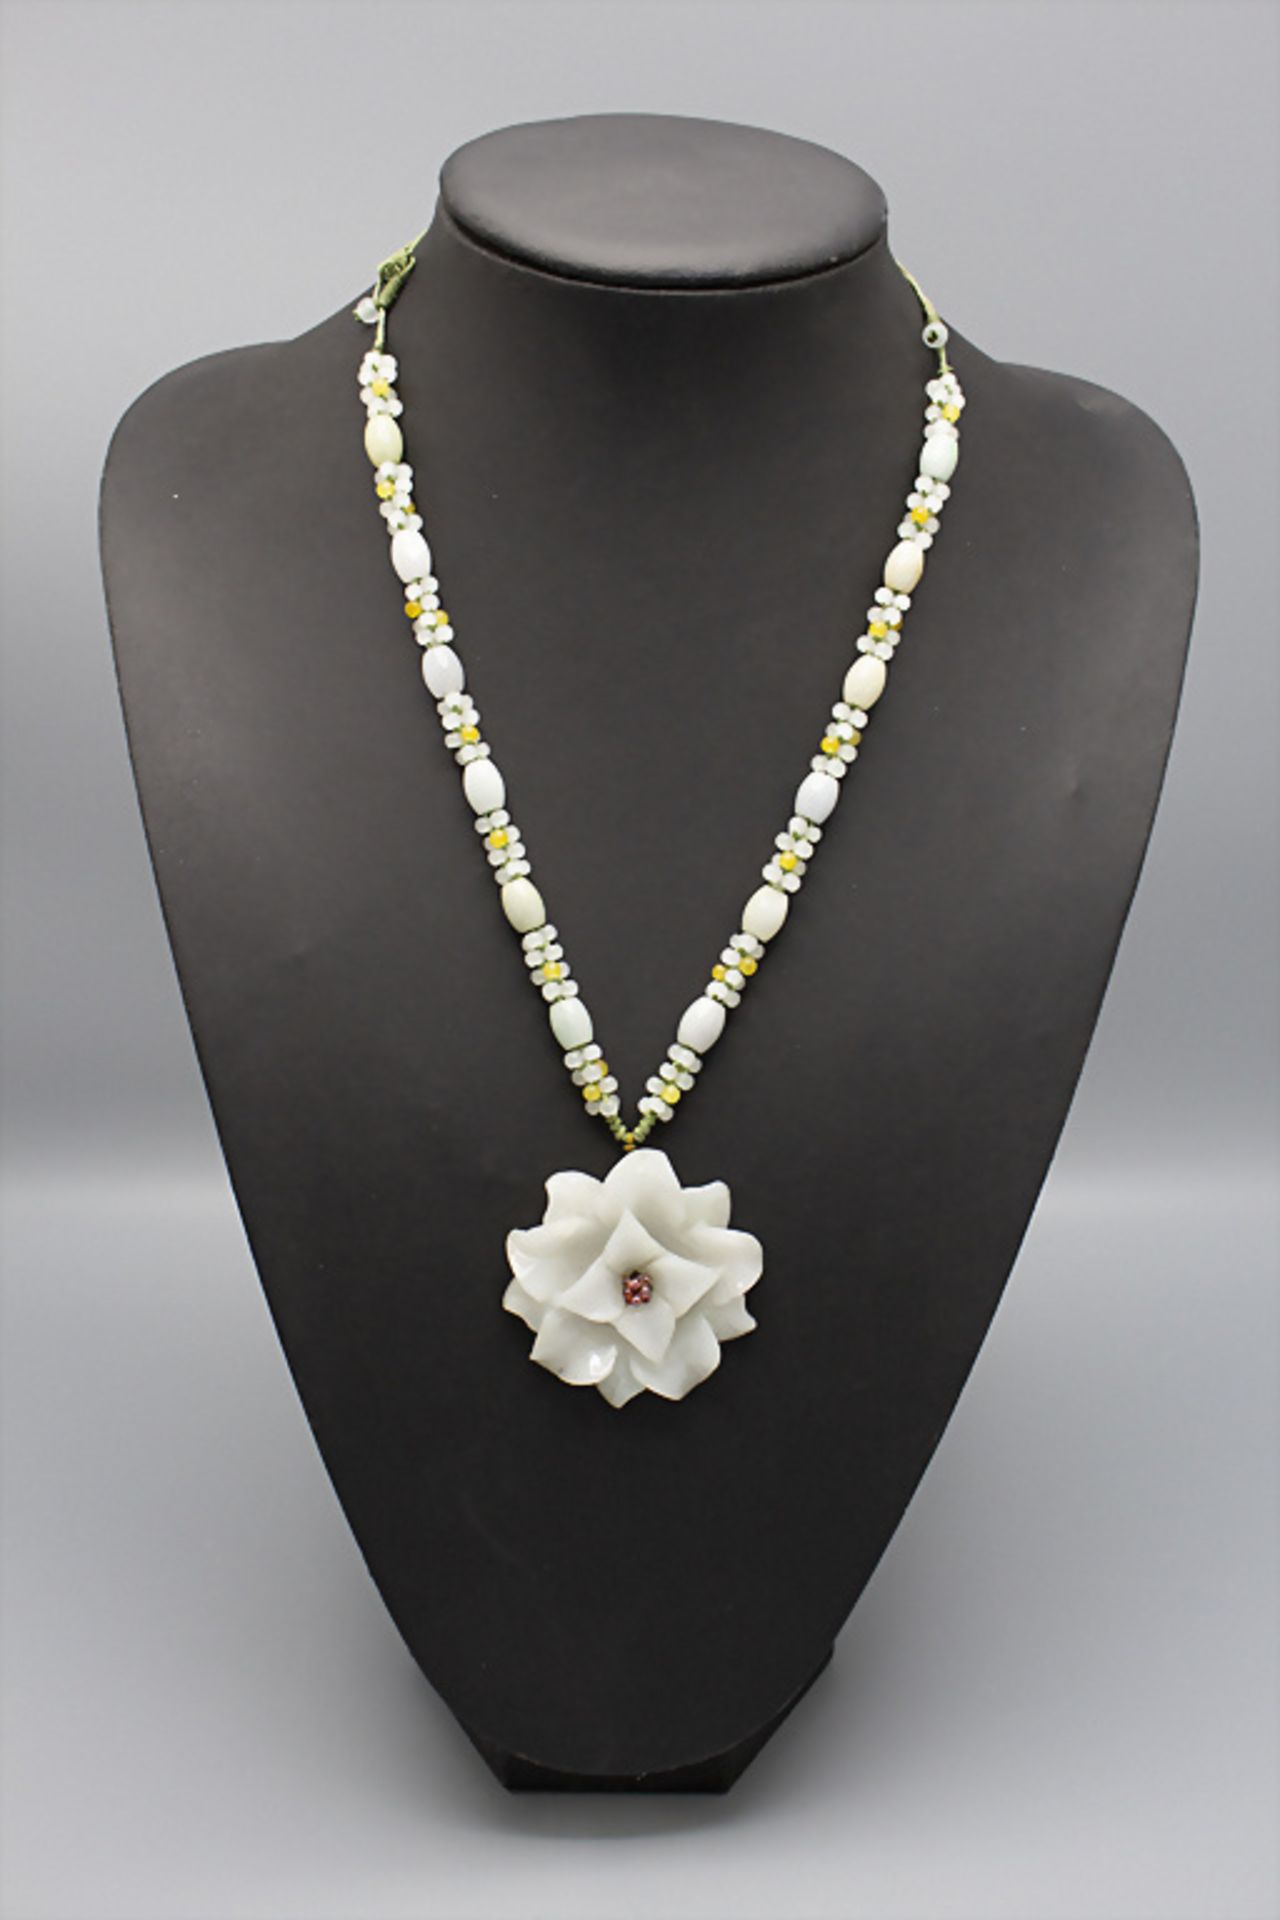 Jadekette mit Seerose / A jade necklace with a water lilly, China